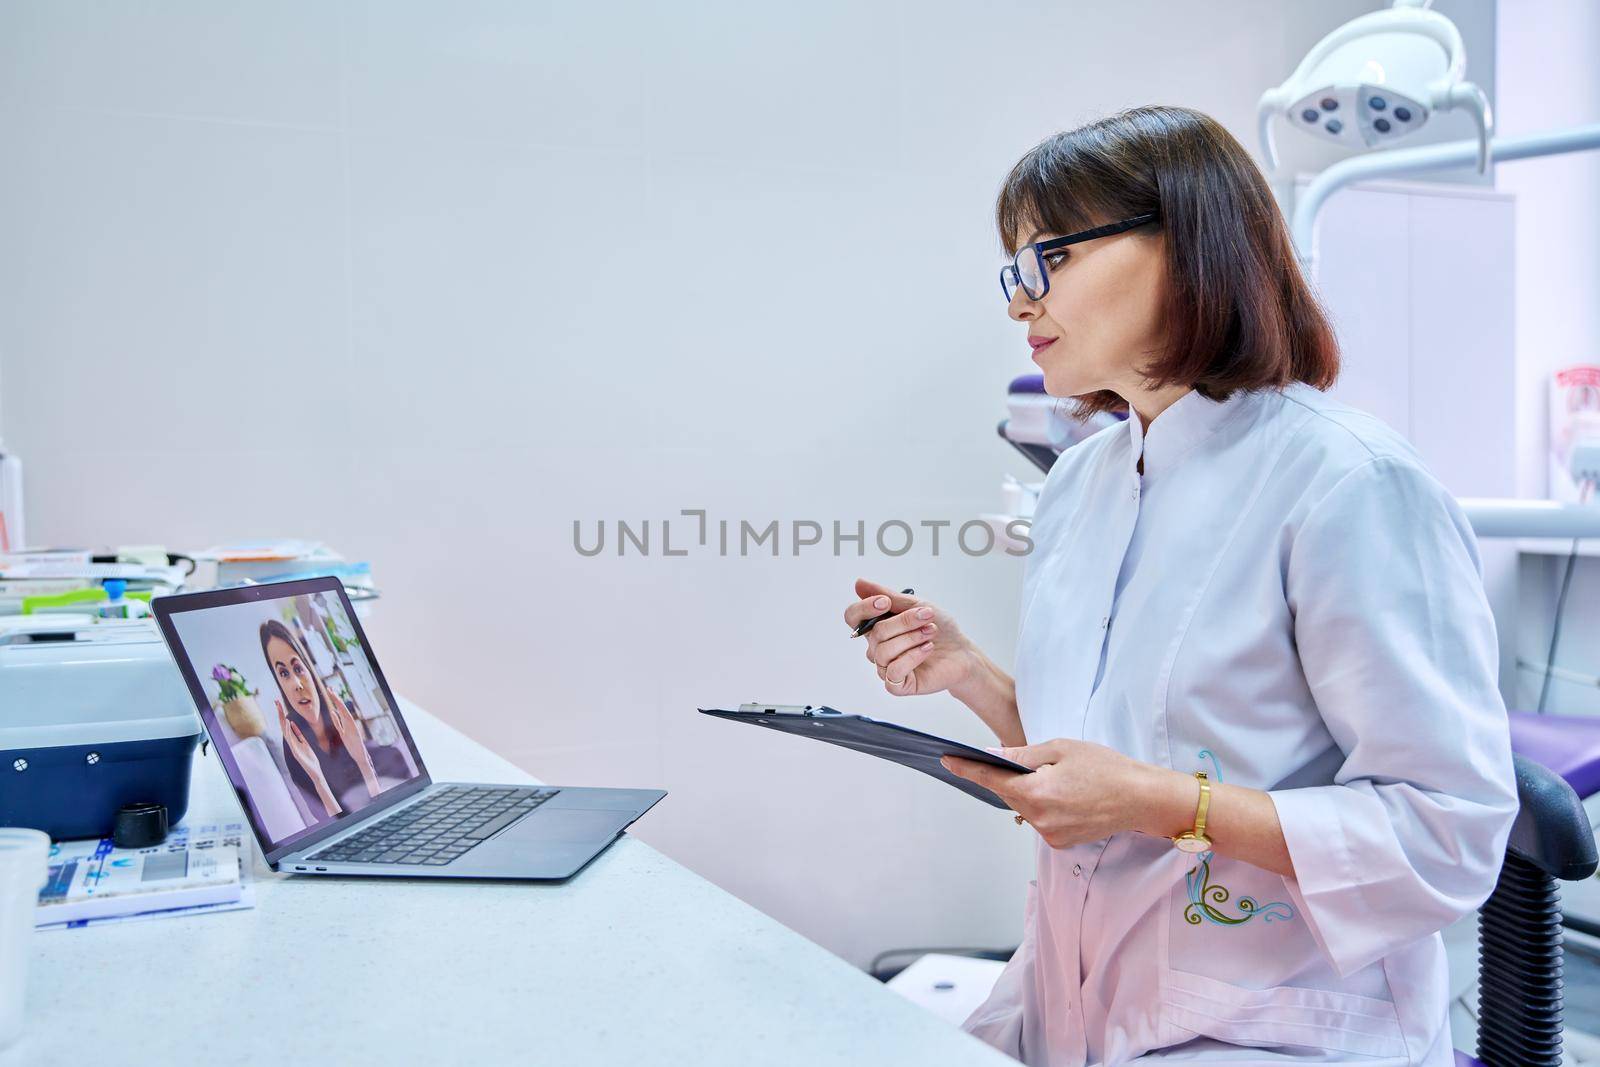 Video chat call conference of doctor dentist and young woman patient on laptop screen, in dental office. Online meeting, consultation, service, dentistry, medicine, technology concept